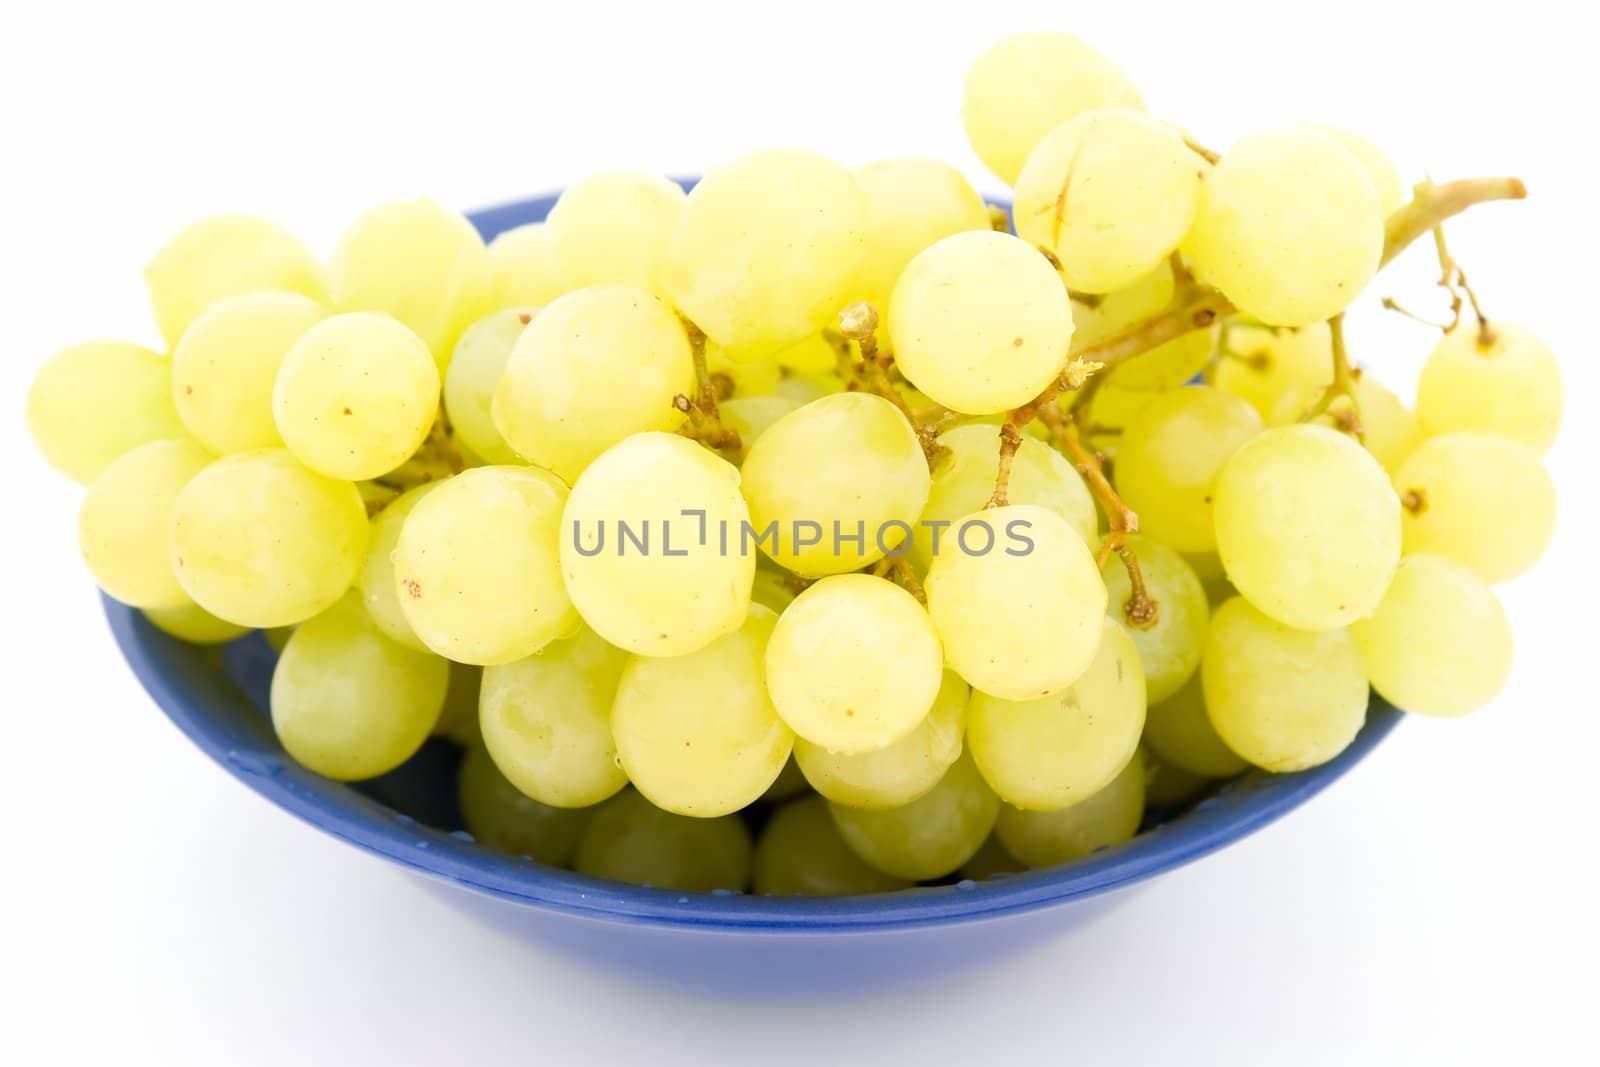 Bunch of grapes on a blue plate